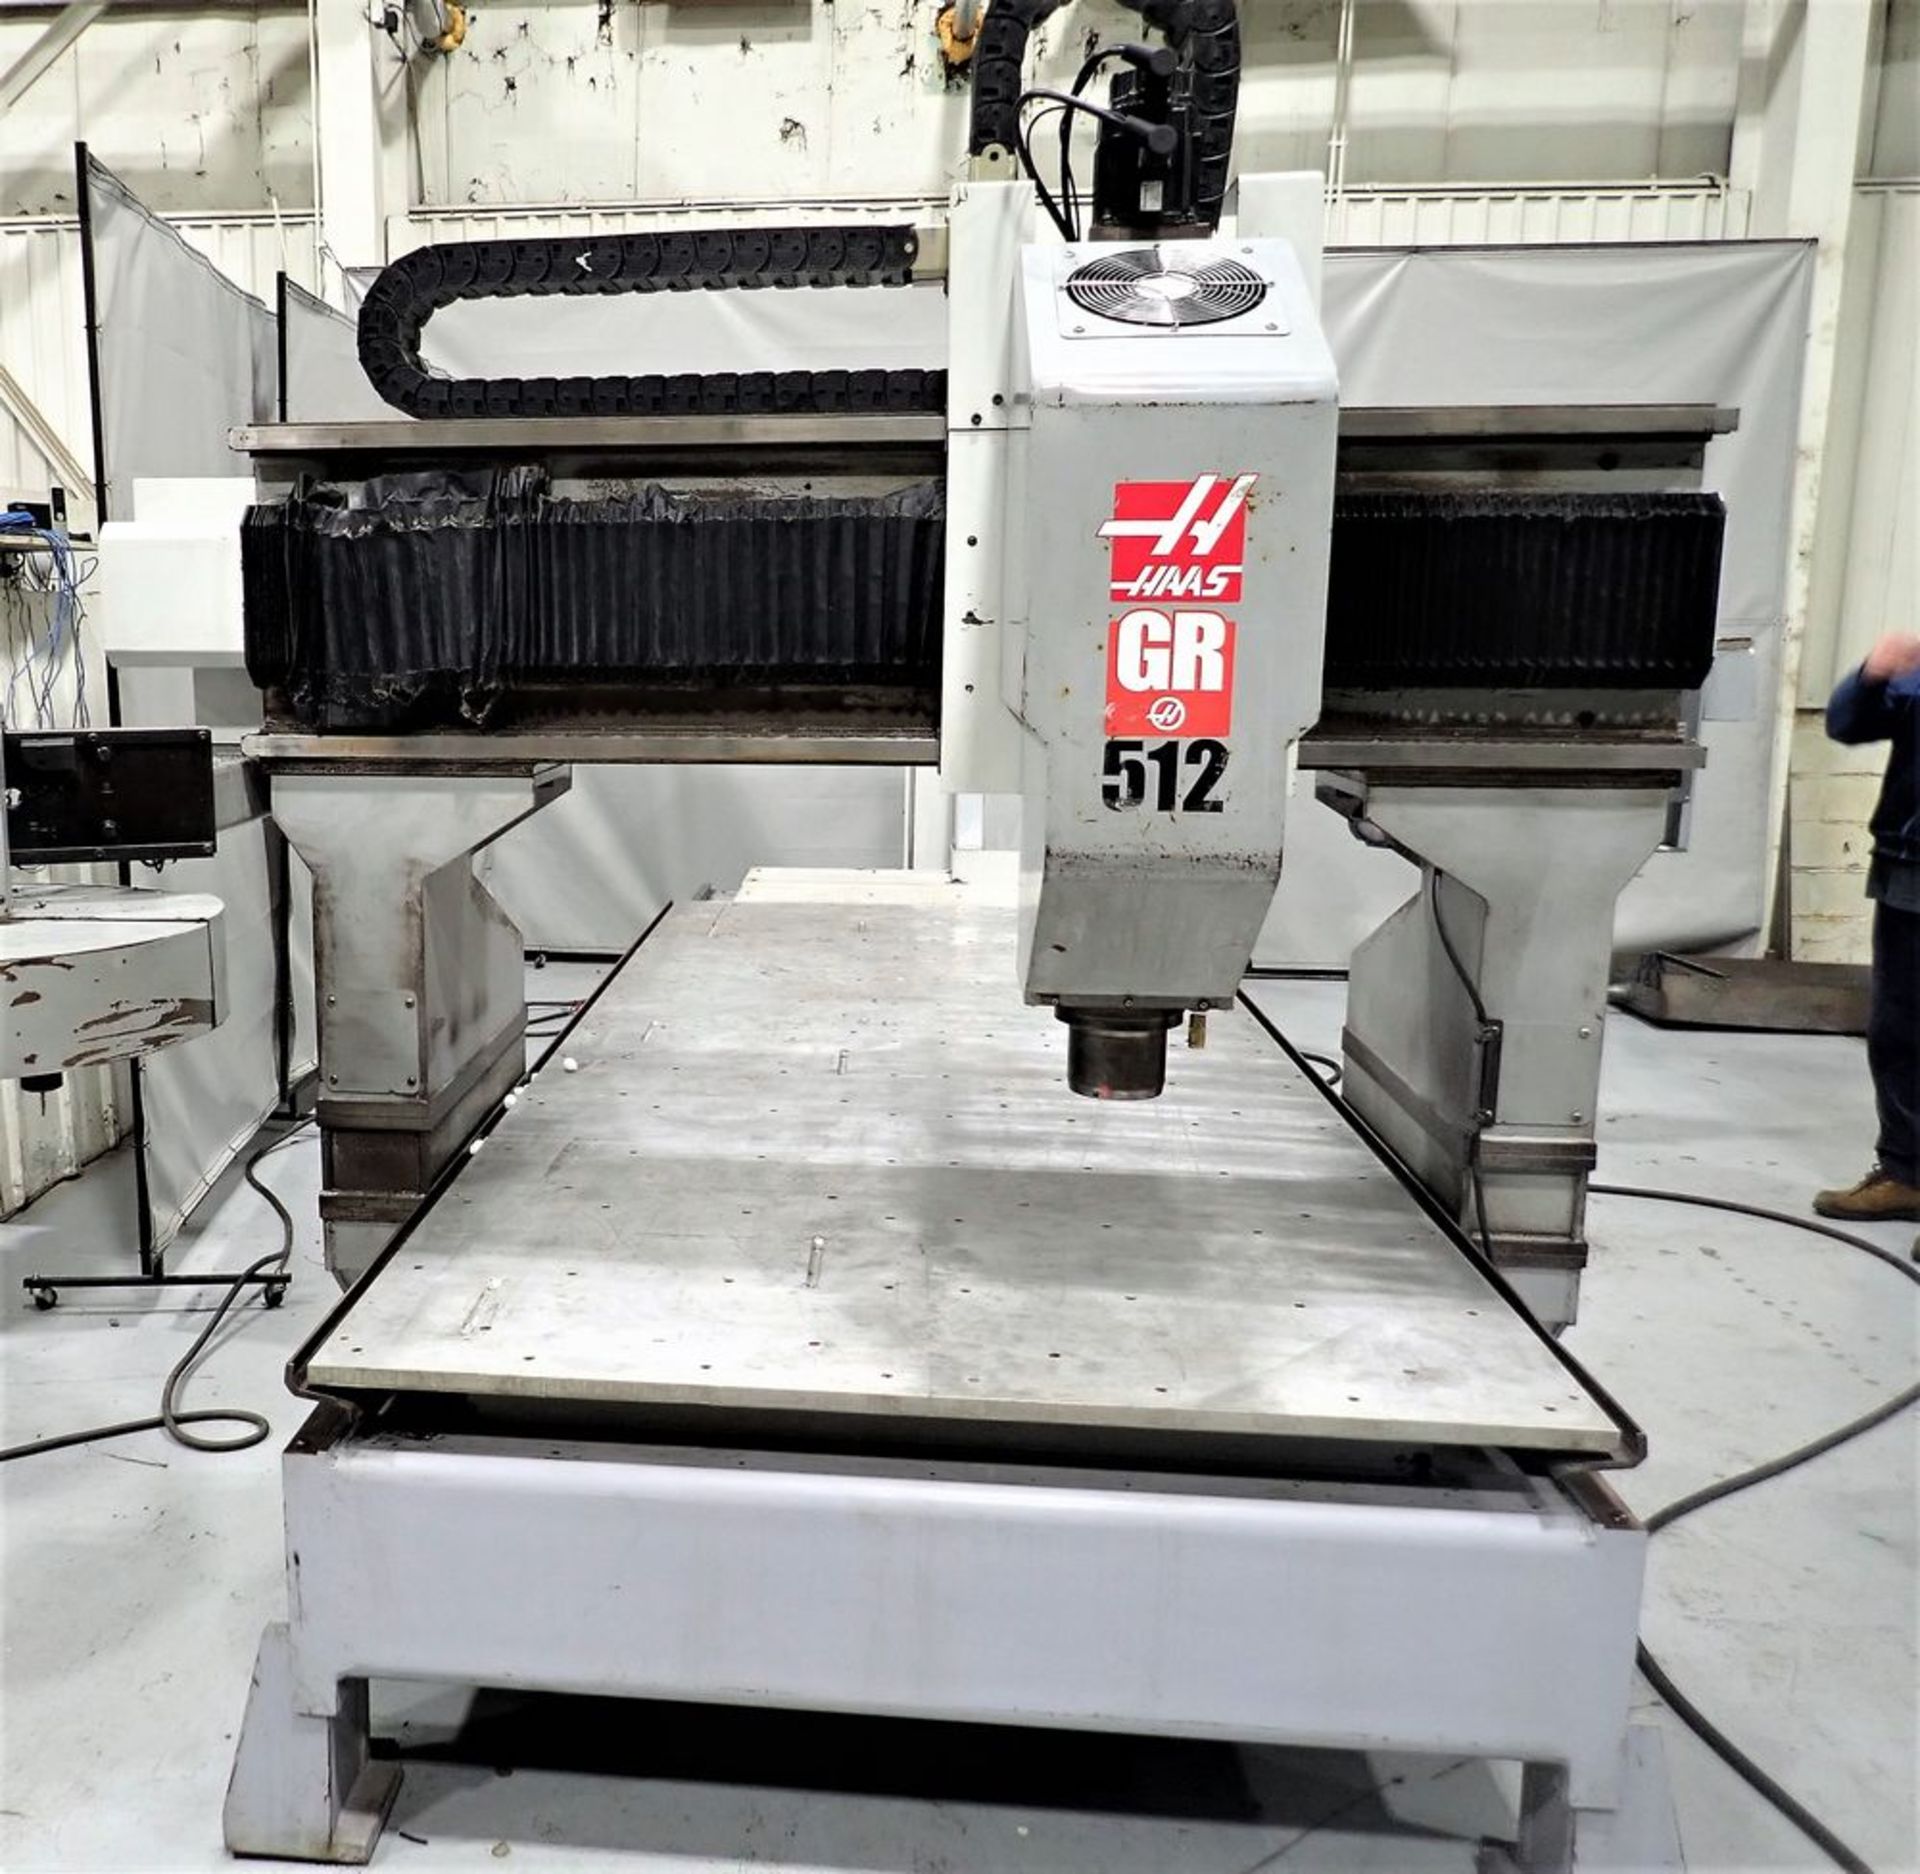 60"x144" HAAS GR-512 CNC 3-AXIS GANTRY ROUTER/VERTICAL MACHINING CENTER, S/N 43675, NEW 2005 - Image 3 of 8